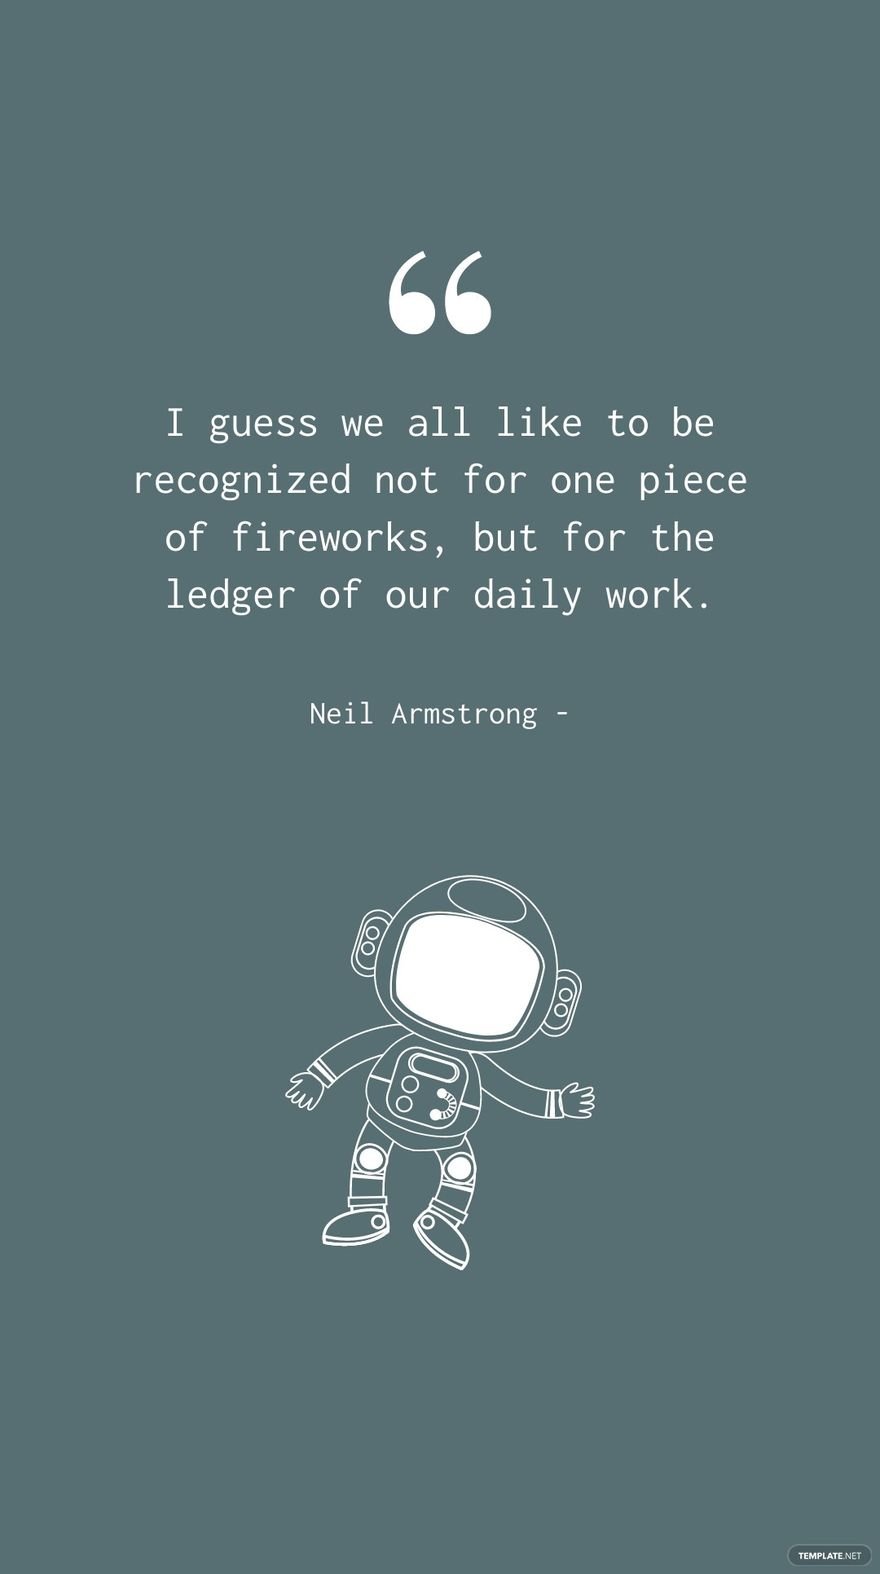 Neil Armstrong - I guess we all like to be recognized not for one piece of fireworks, but for the ledger of our daily work.